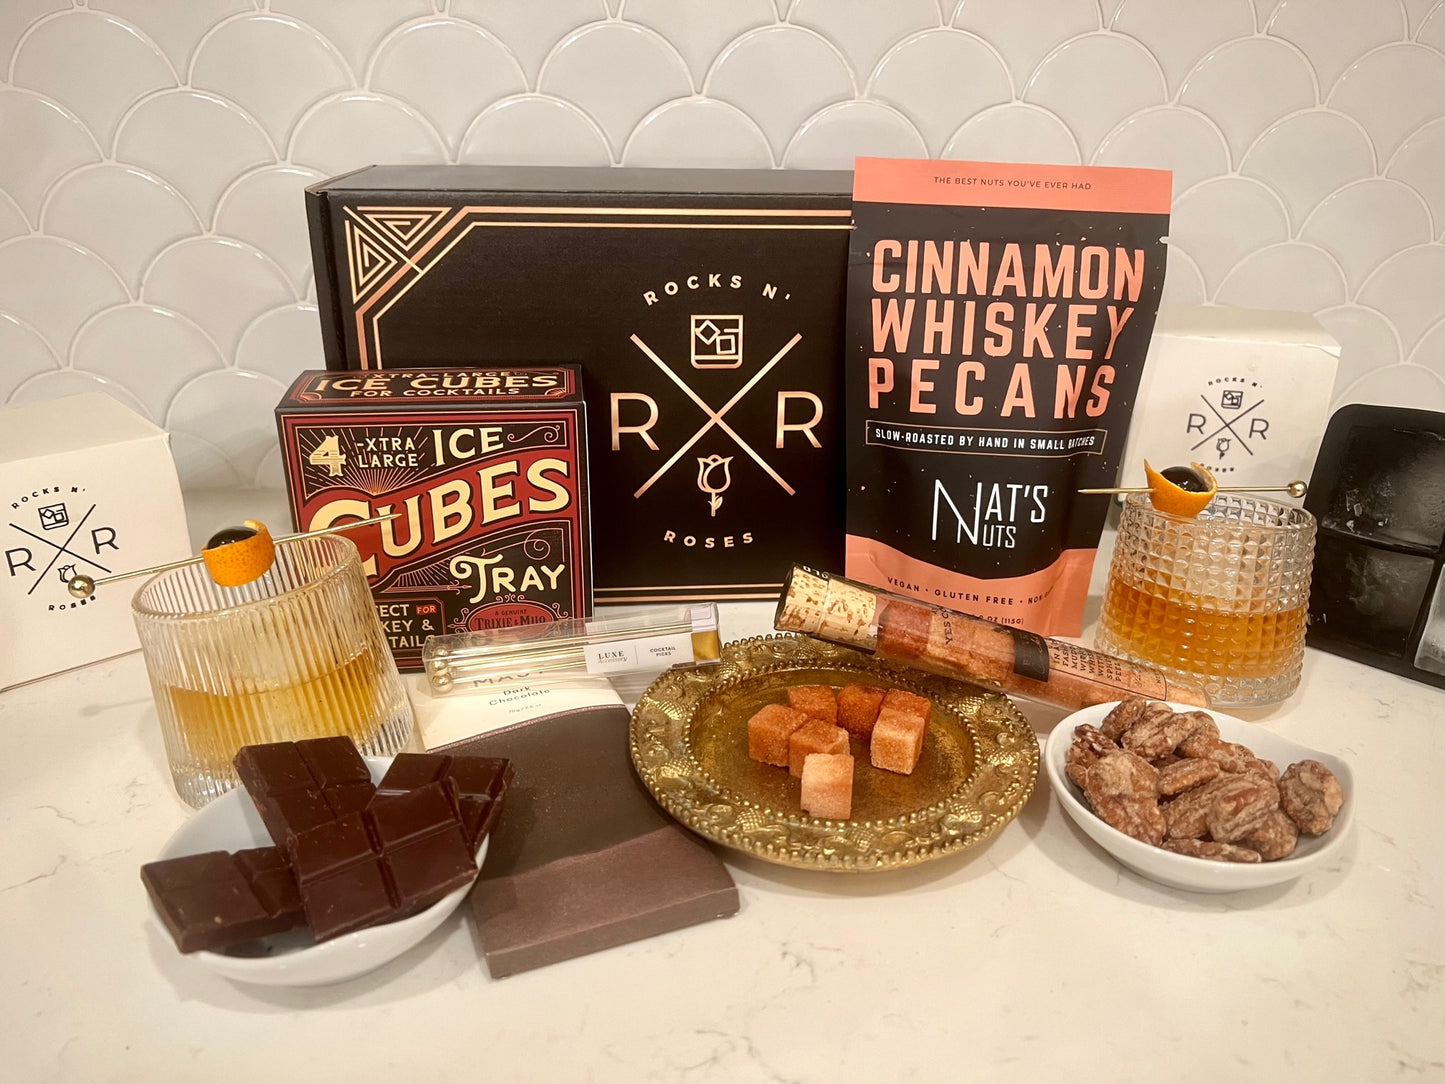 An image of the Rocks N' Roses Bourbon Box unpacked. Featuring two spinning whiskey glasses, Yes Cocktail Co.'s five spice organic Old Fashioned sugar cubes, Nat's Nuts cinnamon whiskey pecans, Trixie & Milo's BPA Free xtra large ice cubes, Mast Brother's dark chocolate bar and Luxe's cocktail spears.